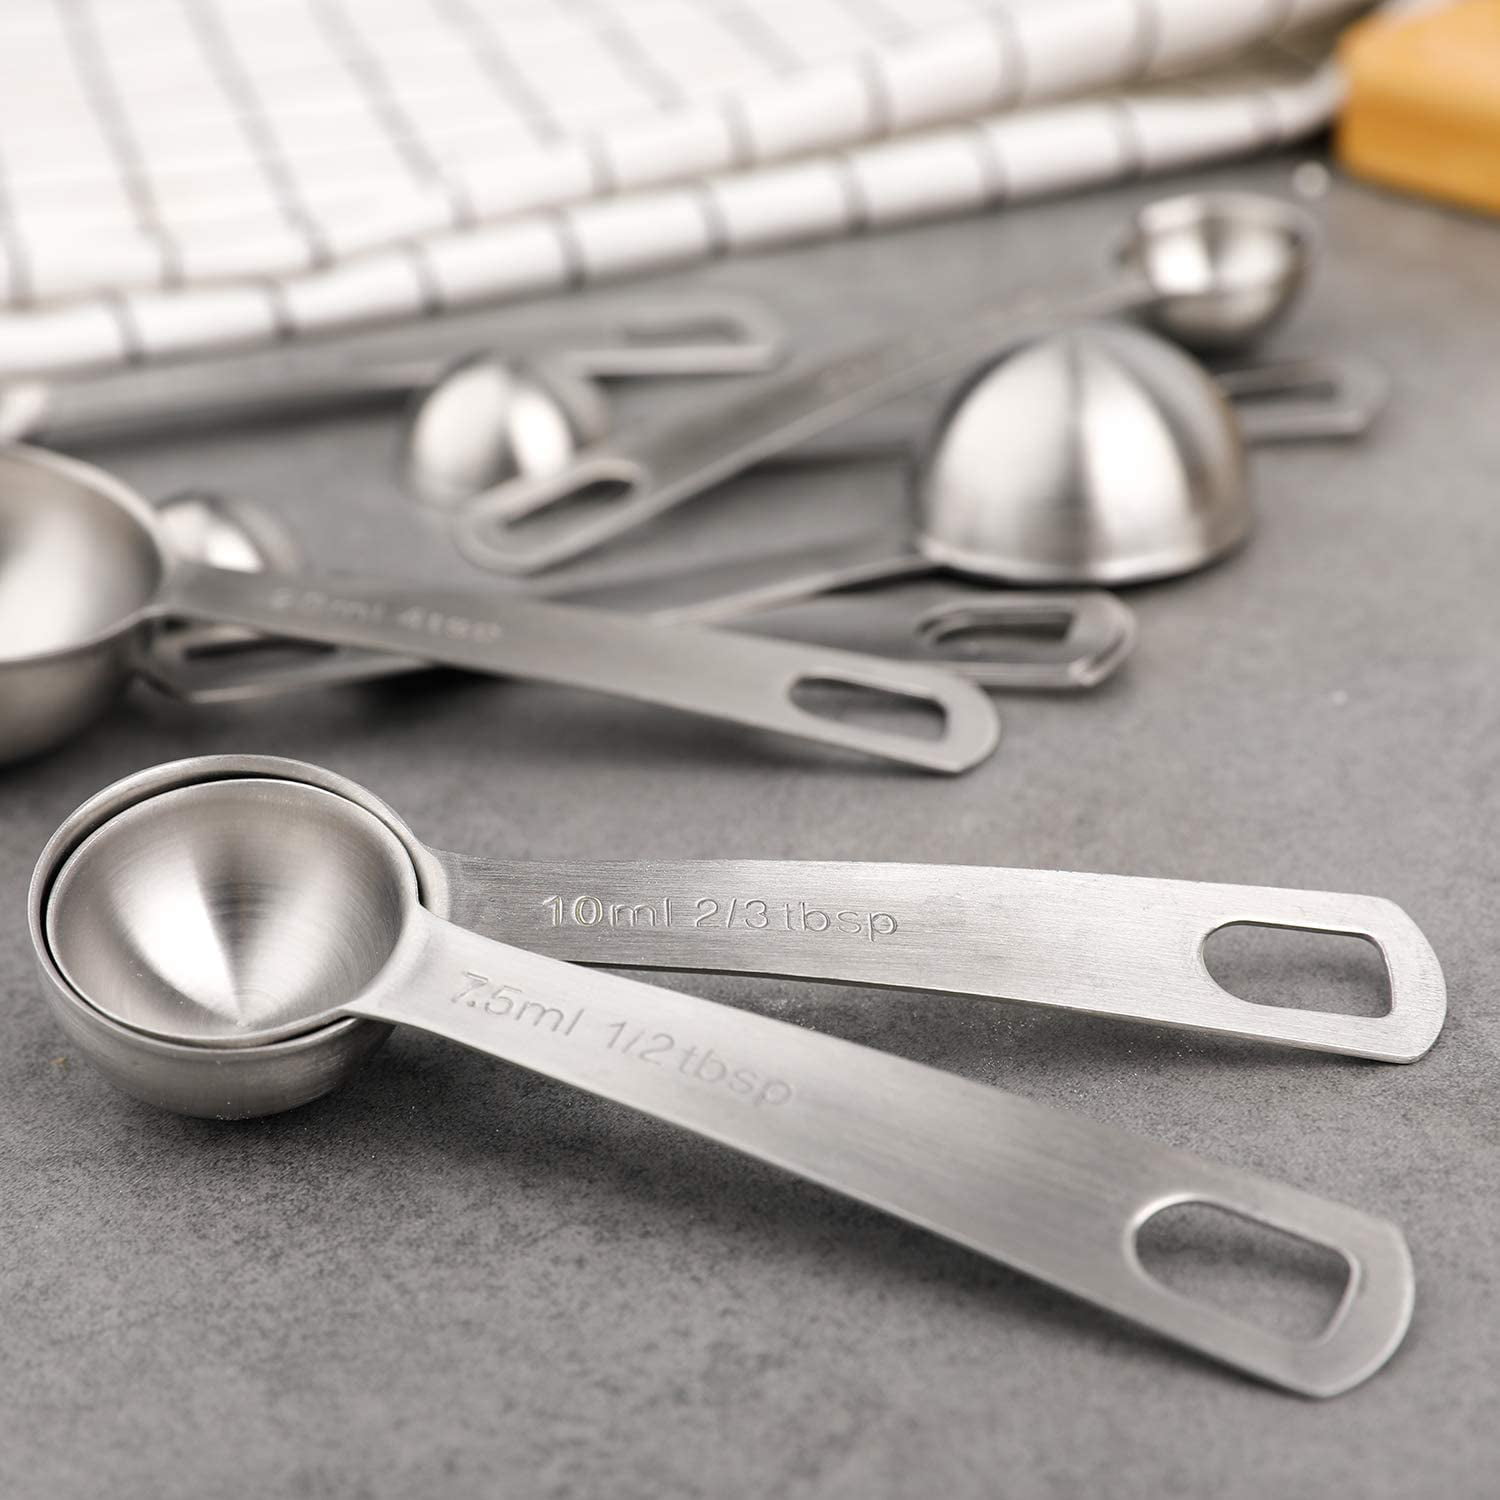 Lomana 9-Pieces Stainless Steel Measuring Spoon Set & Reviews